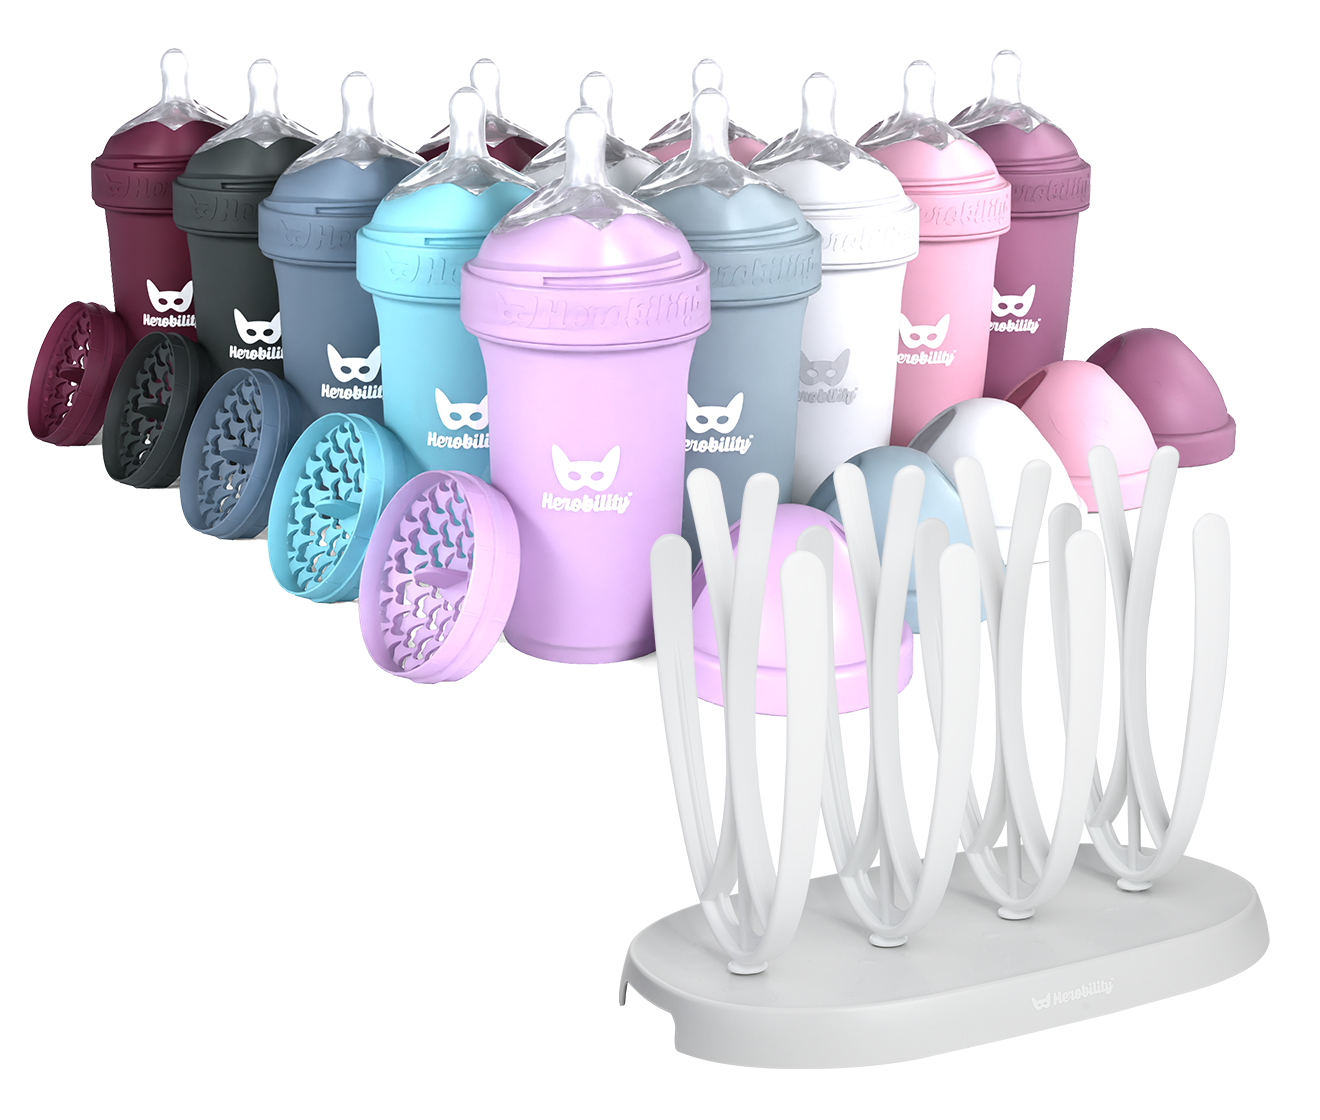 12-pack 240 ml / 8.5 floz Baby Bottles & Drying rack with 75% off